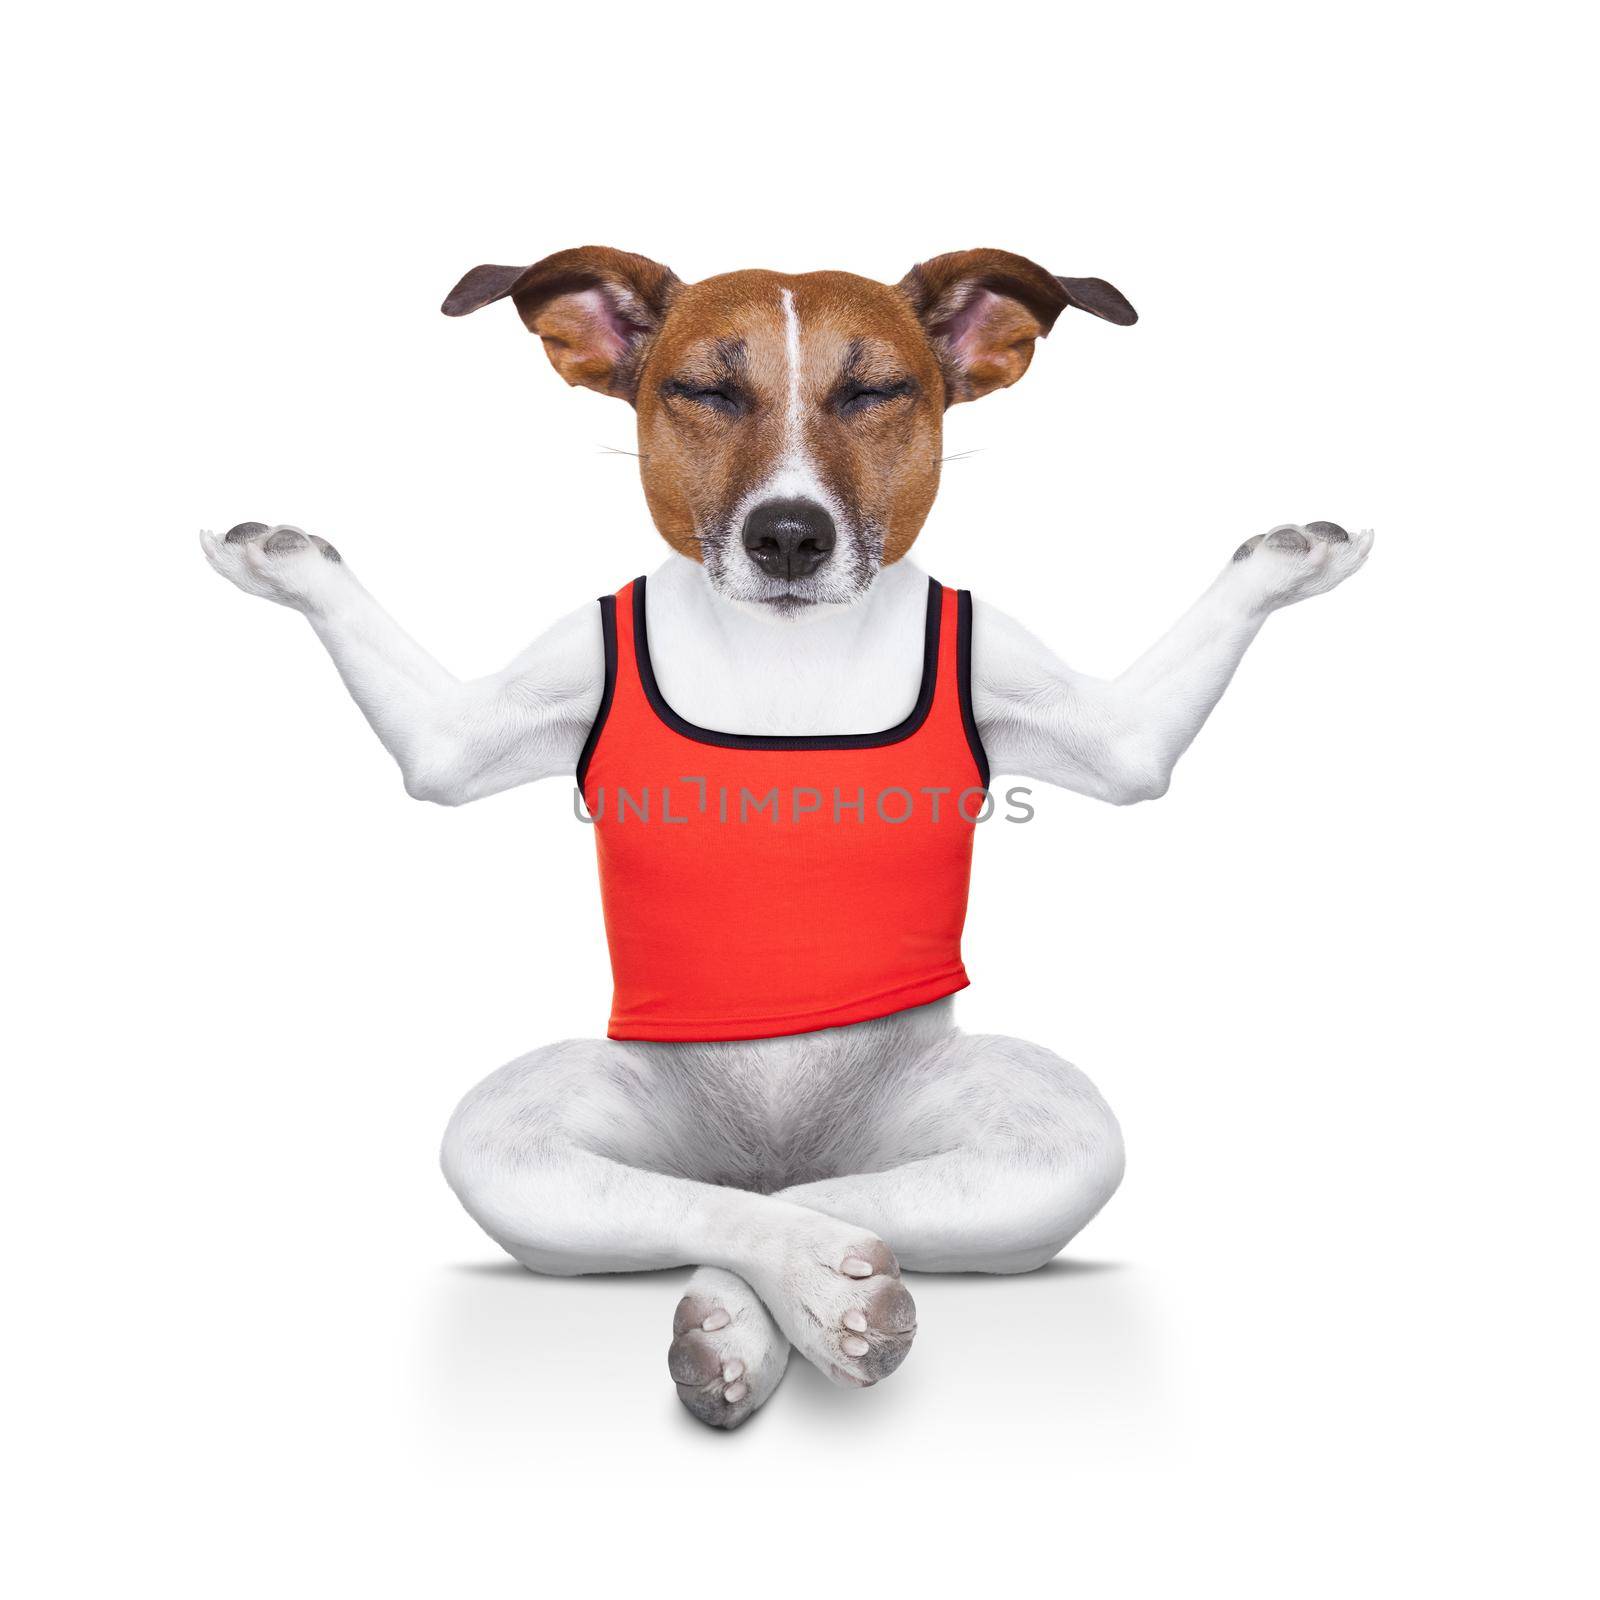 yoga dog posing in a relaxing pose with both arms open and closed eyes, isolated on white background